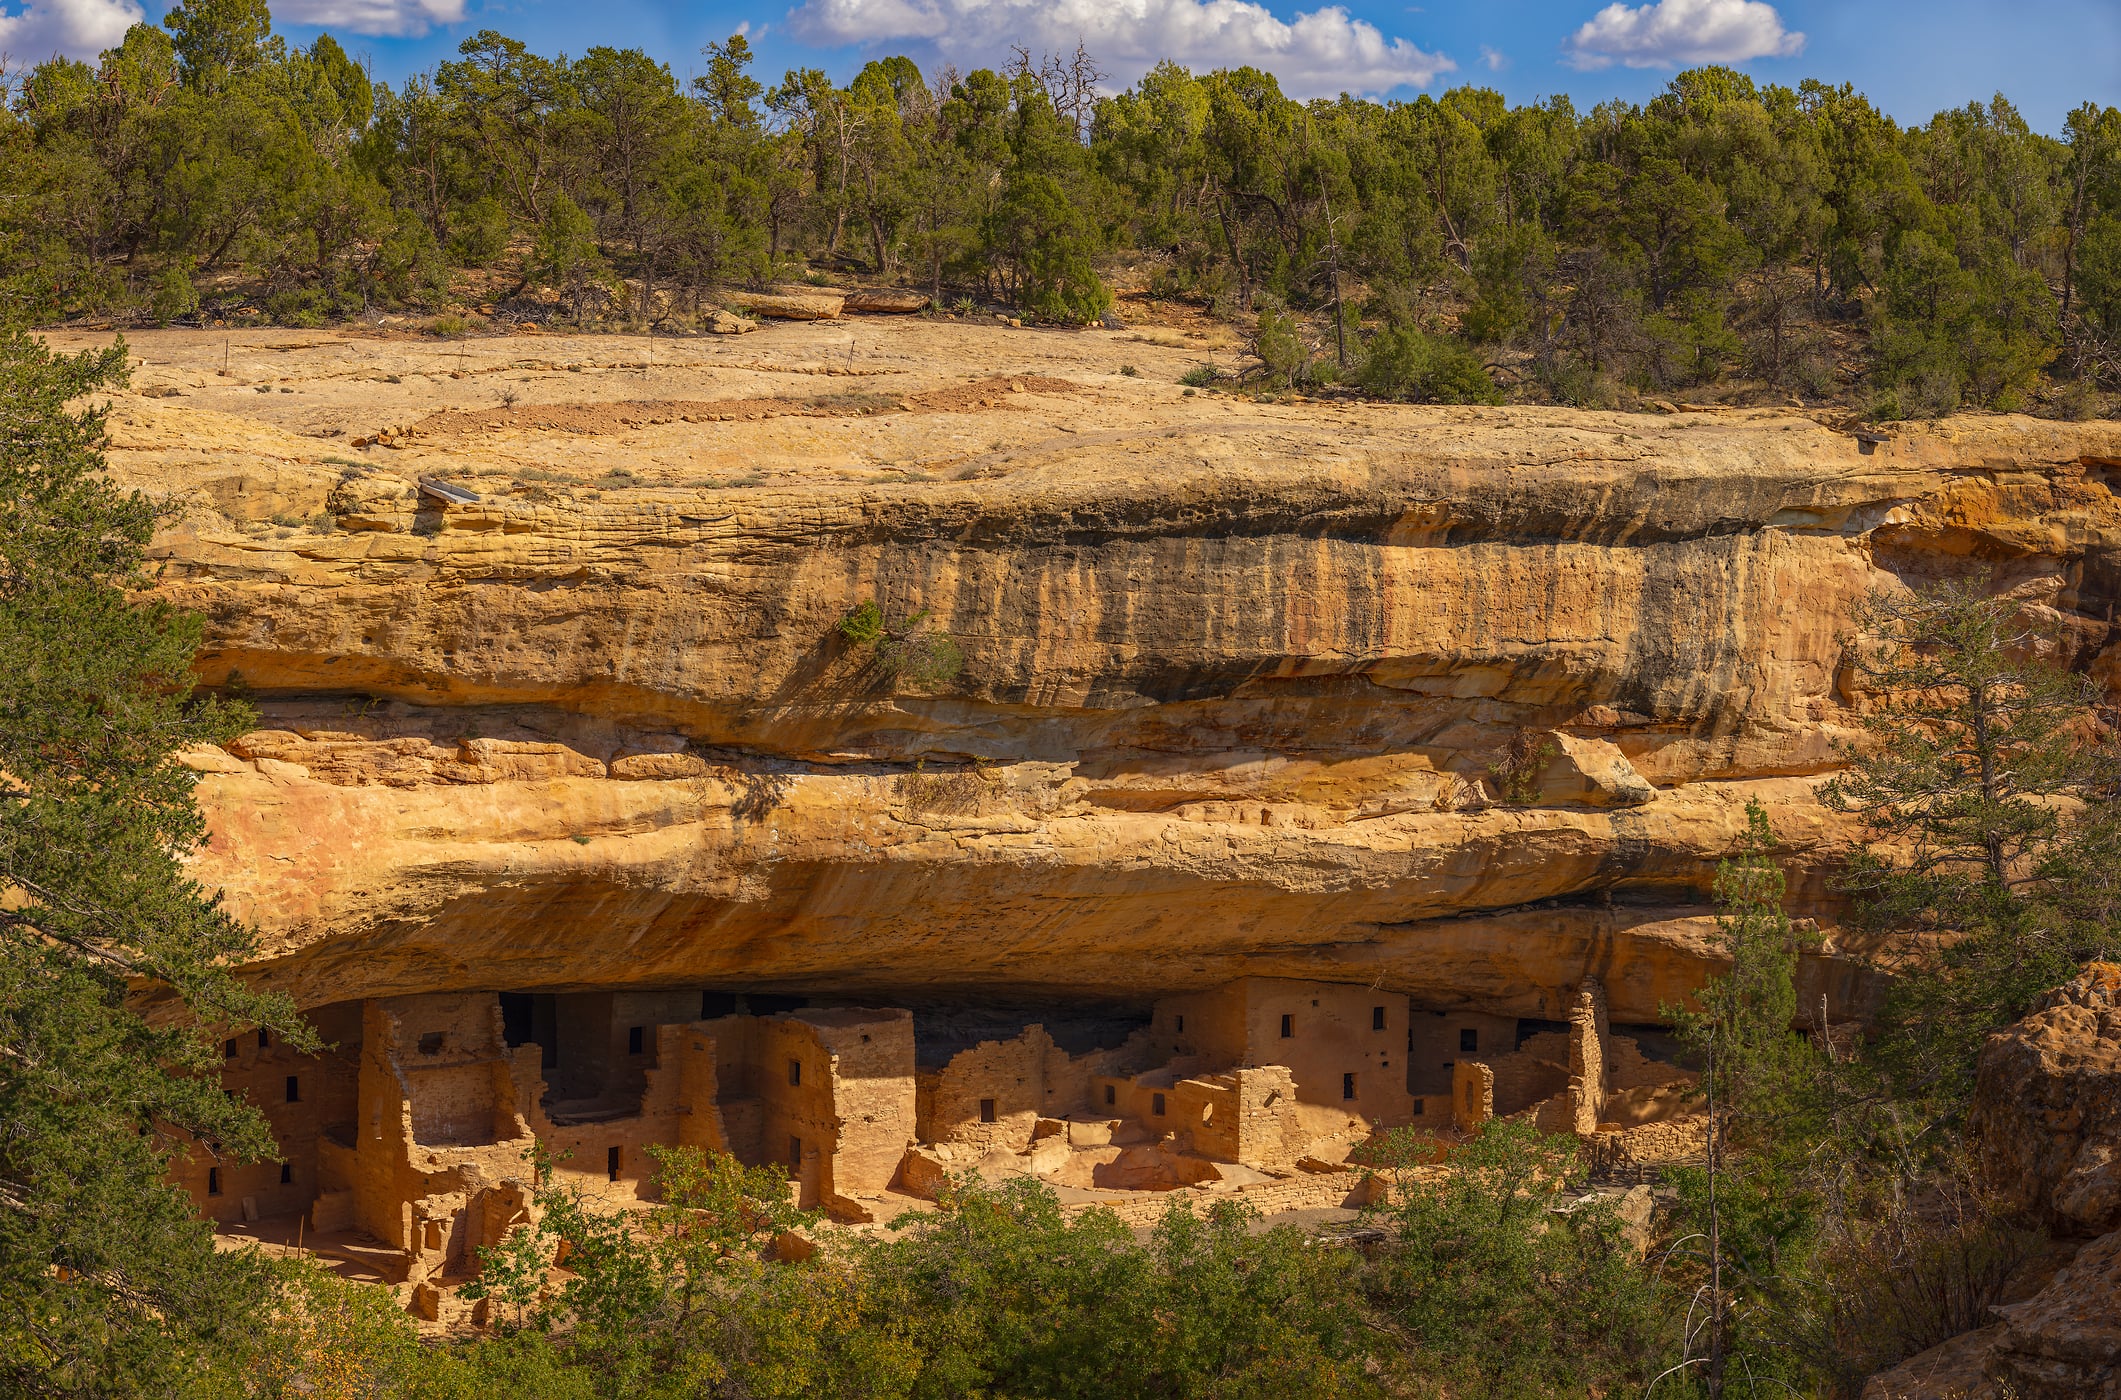 4,474 megapixels! A very high resolution, large-format VAST photo print of Spruce Tree House; photograph created by John Freeman in Chapin Mesa Archeological Museum, Mesa Verde National Park, Colorado.